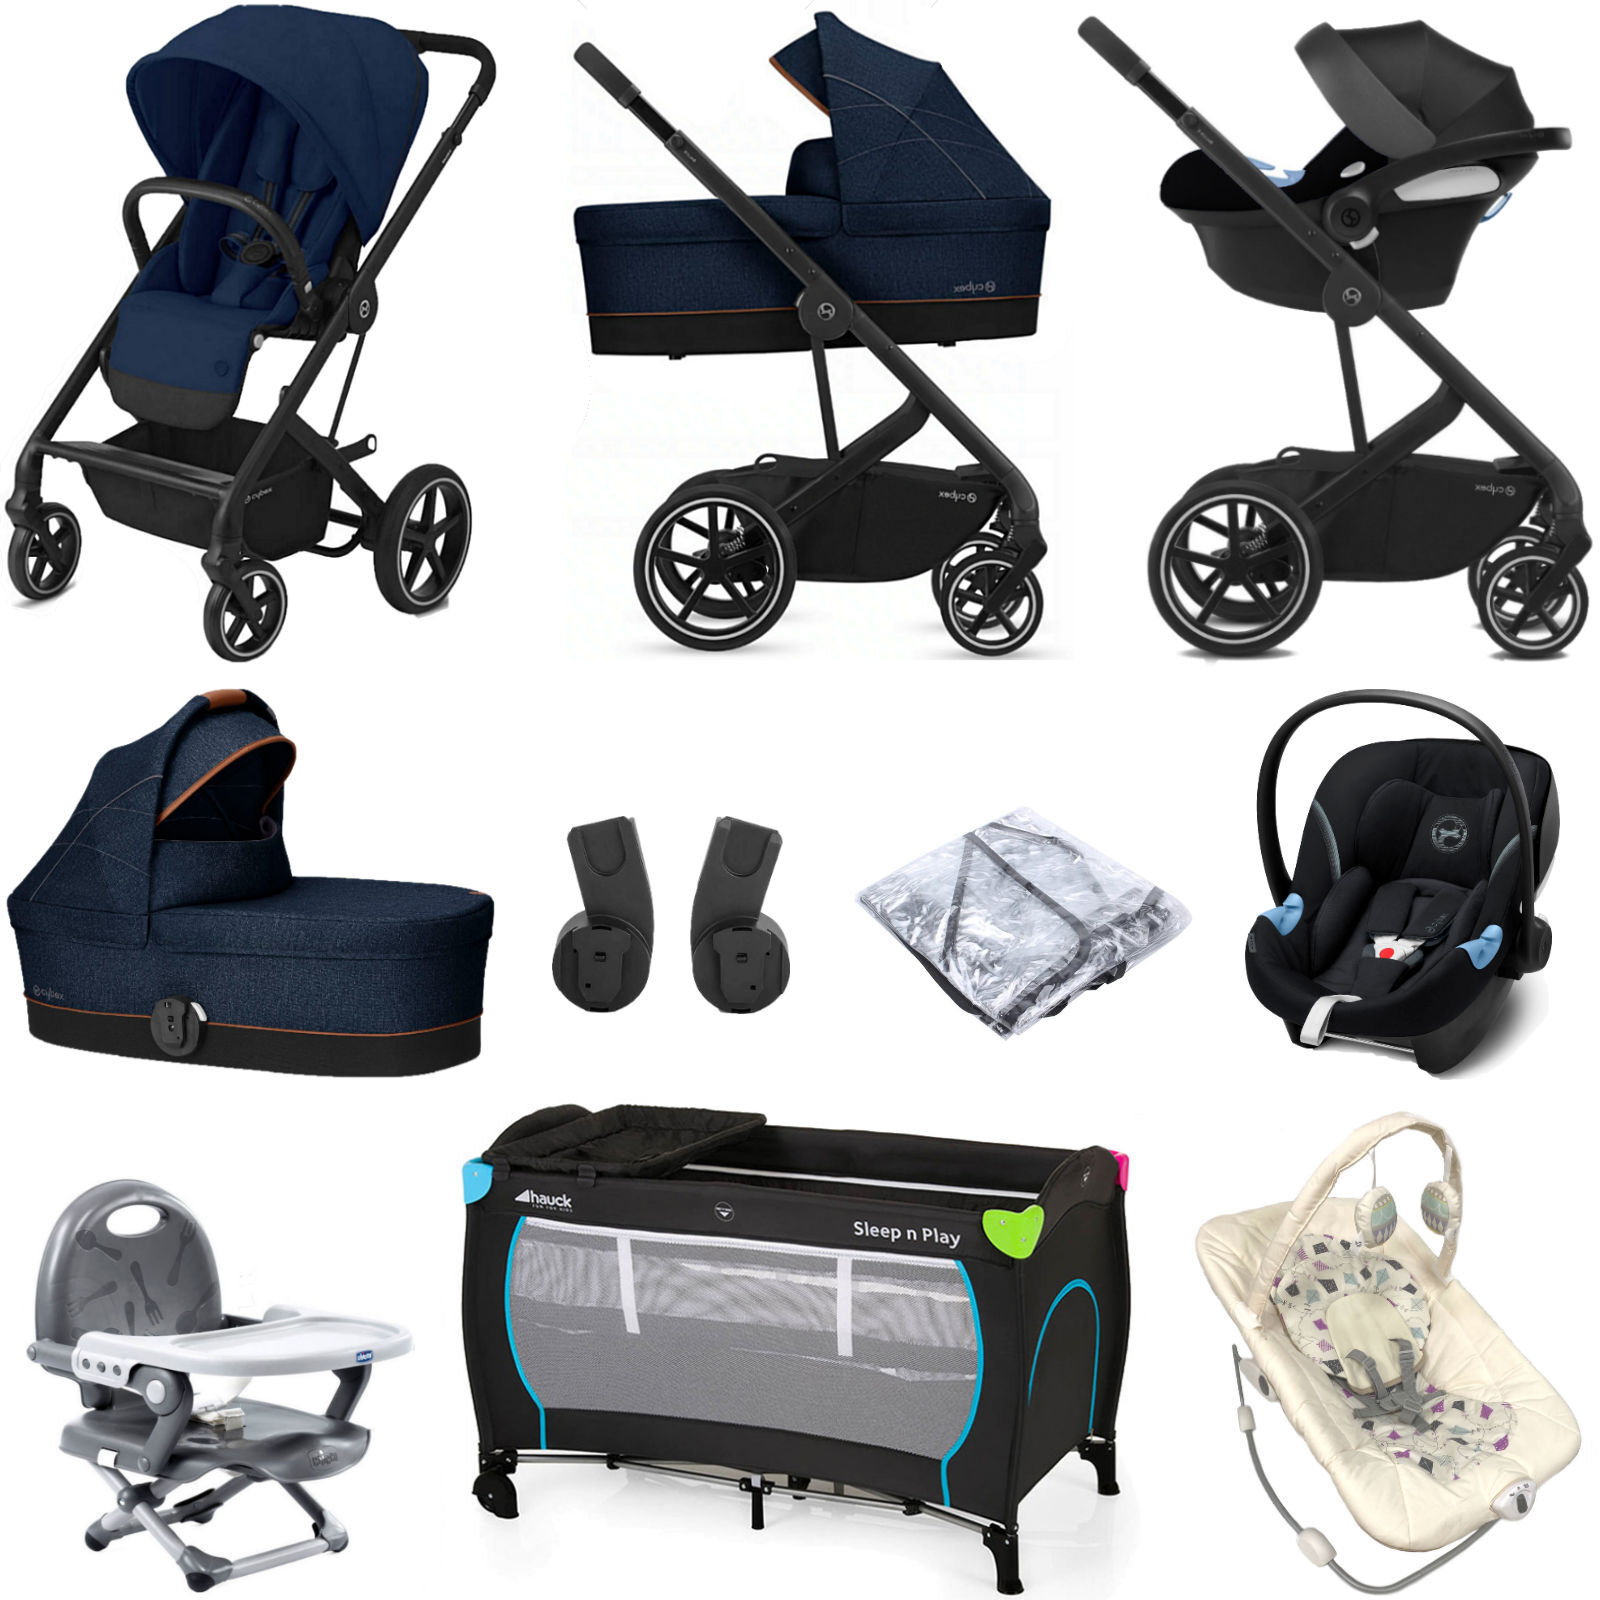 Cybex Balios S Lux (Aton M i-Size) Everything You Need Travel System Bundle with Carrycot - Navy Blue